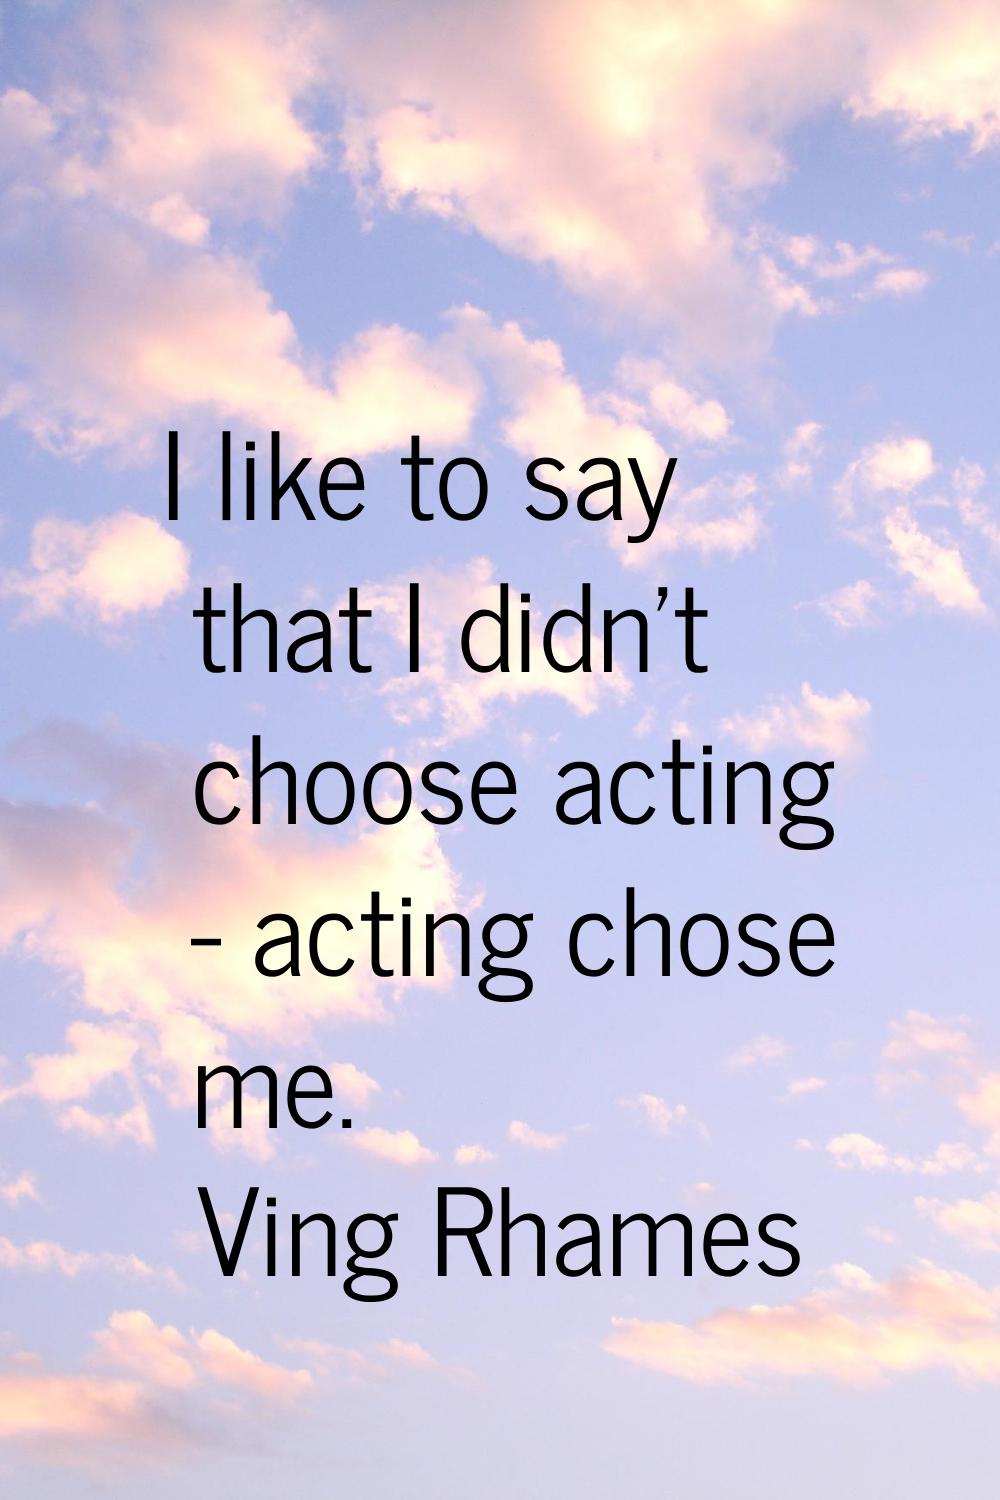 I like to say that I didn't choose acting - acting chose me.